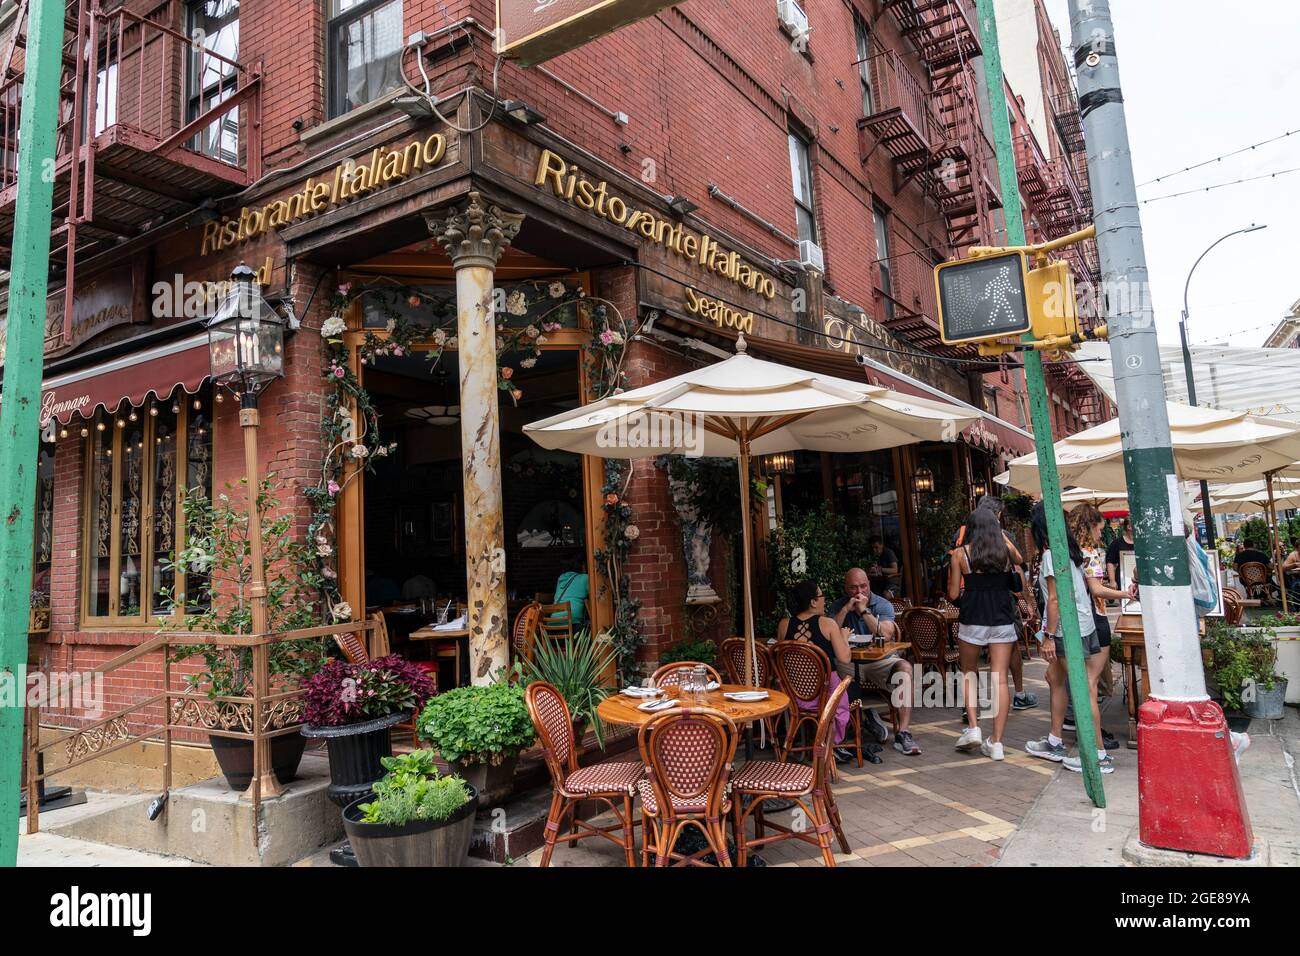 New York, NY - August 17, 2021: View of Ristorante Italiano on 1st day of vaccine mandate for indoor dining on order by mayor of the city Stock Photo